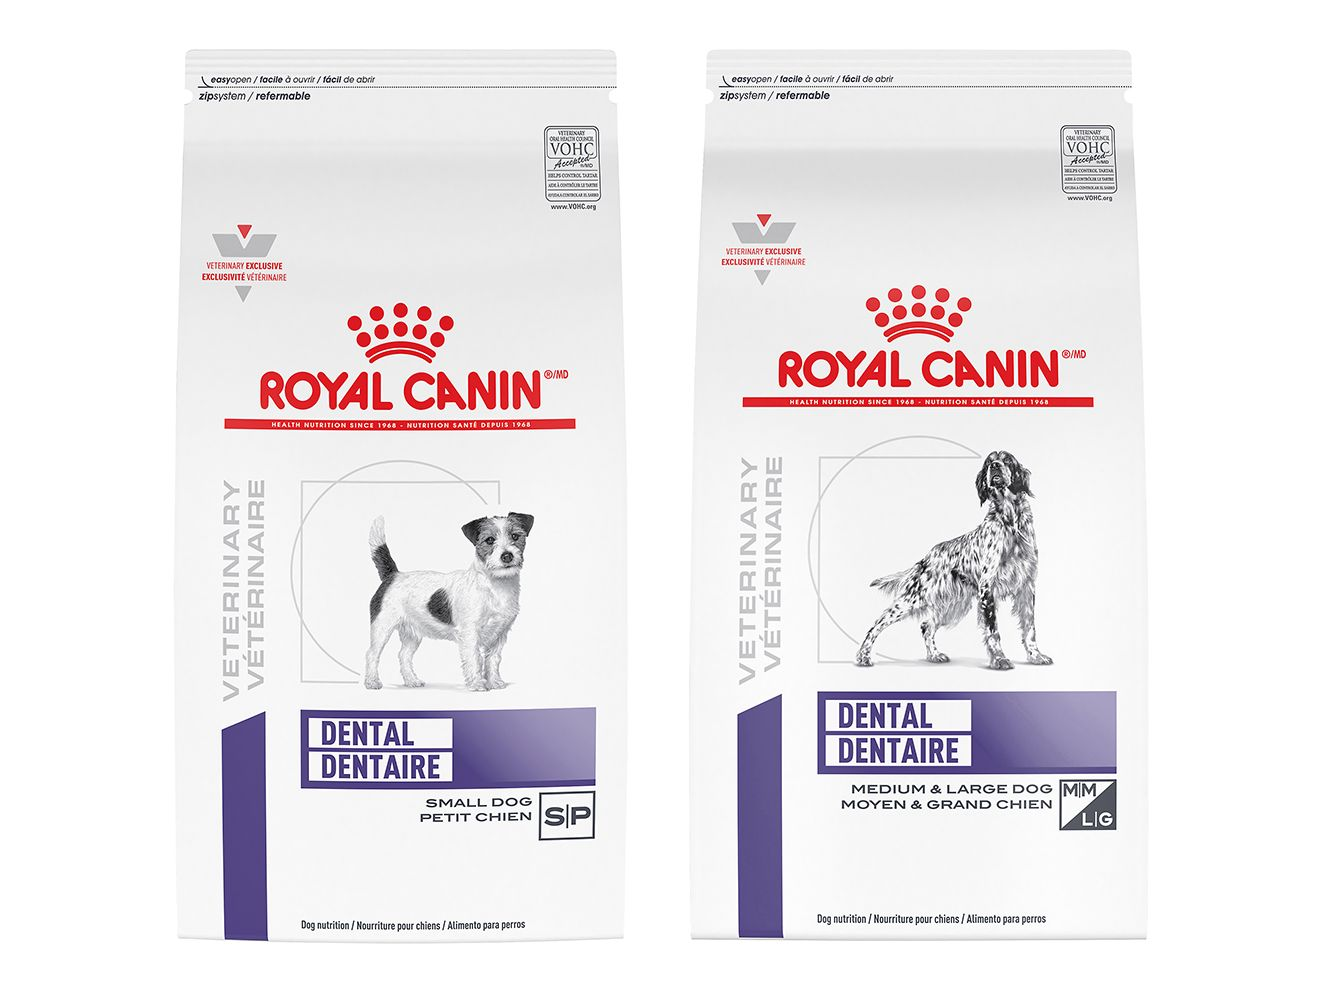 Royal Canin Canine Dental diets